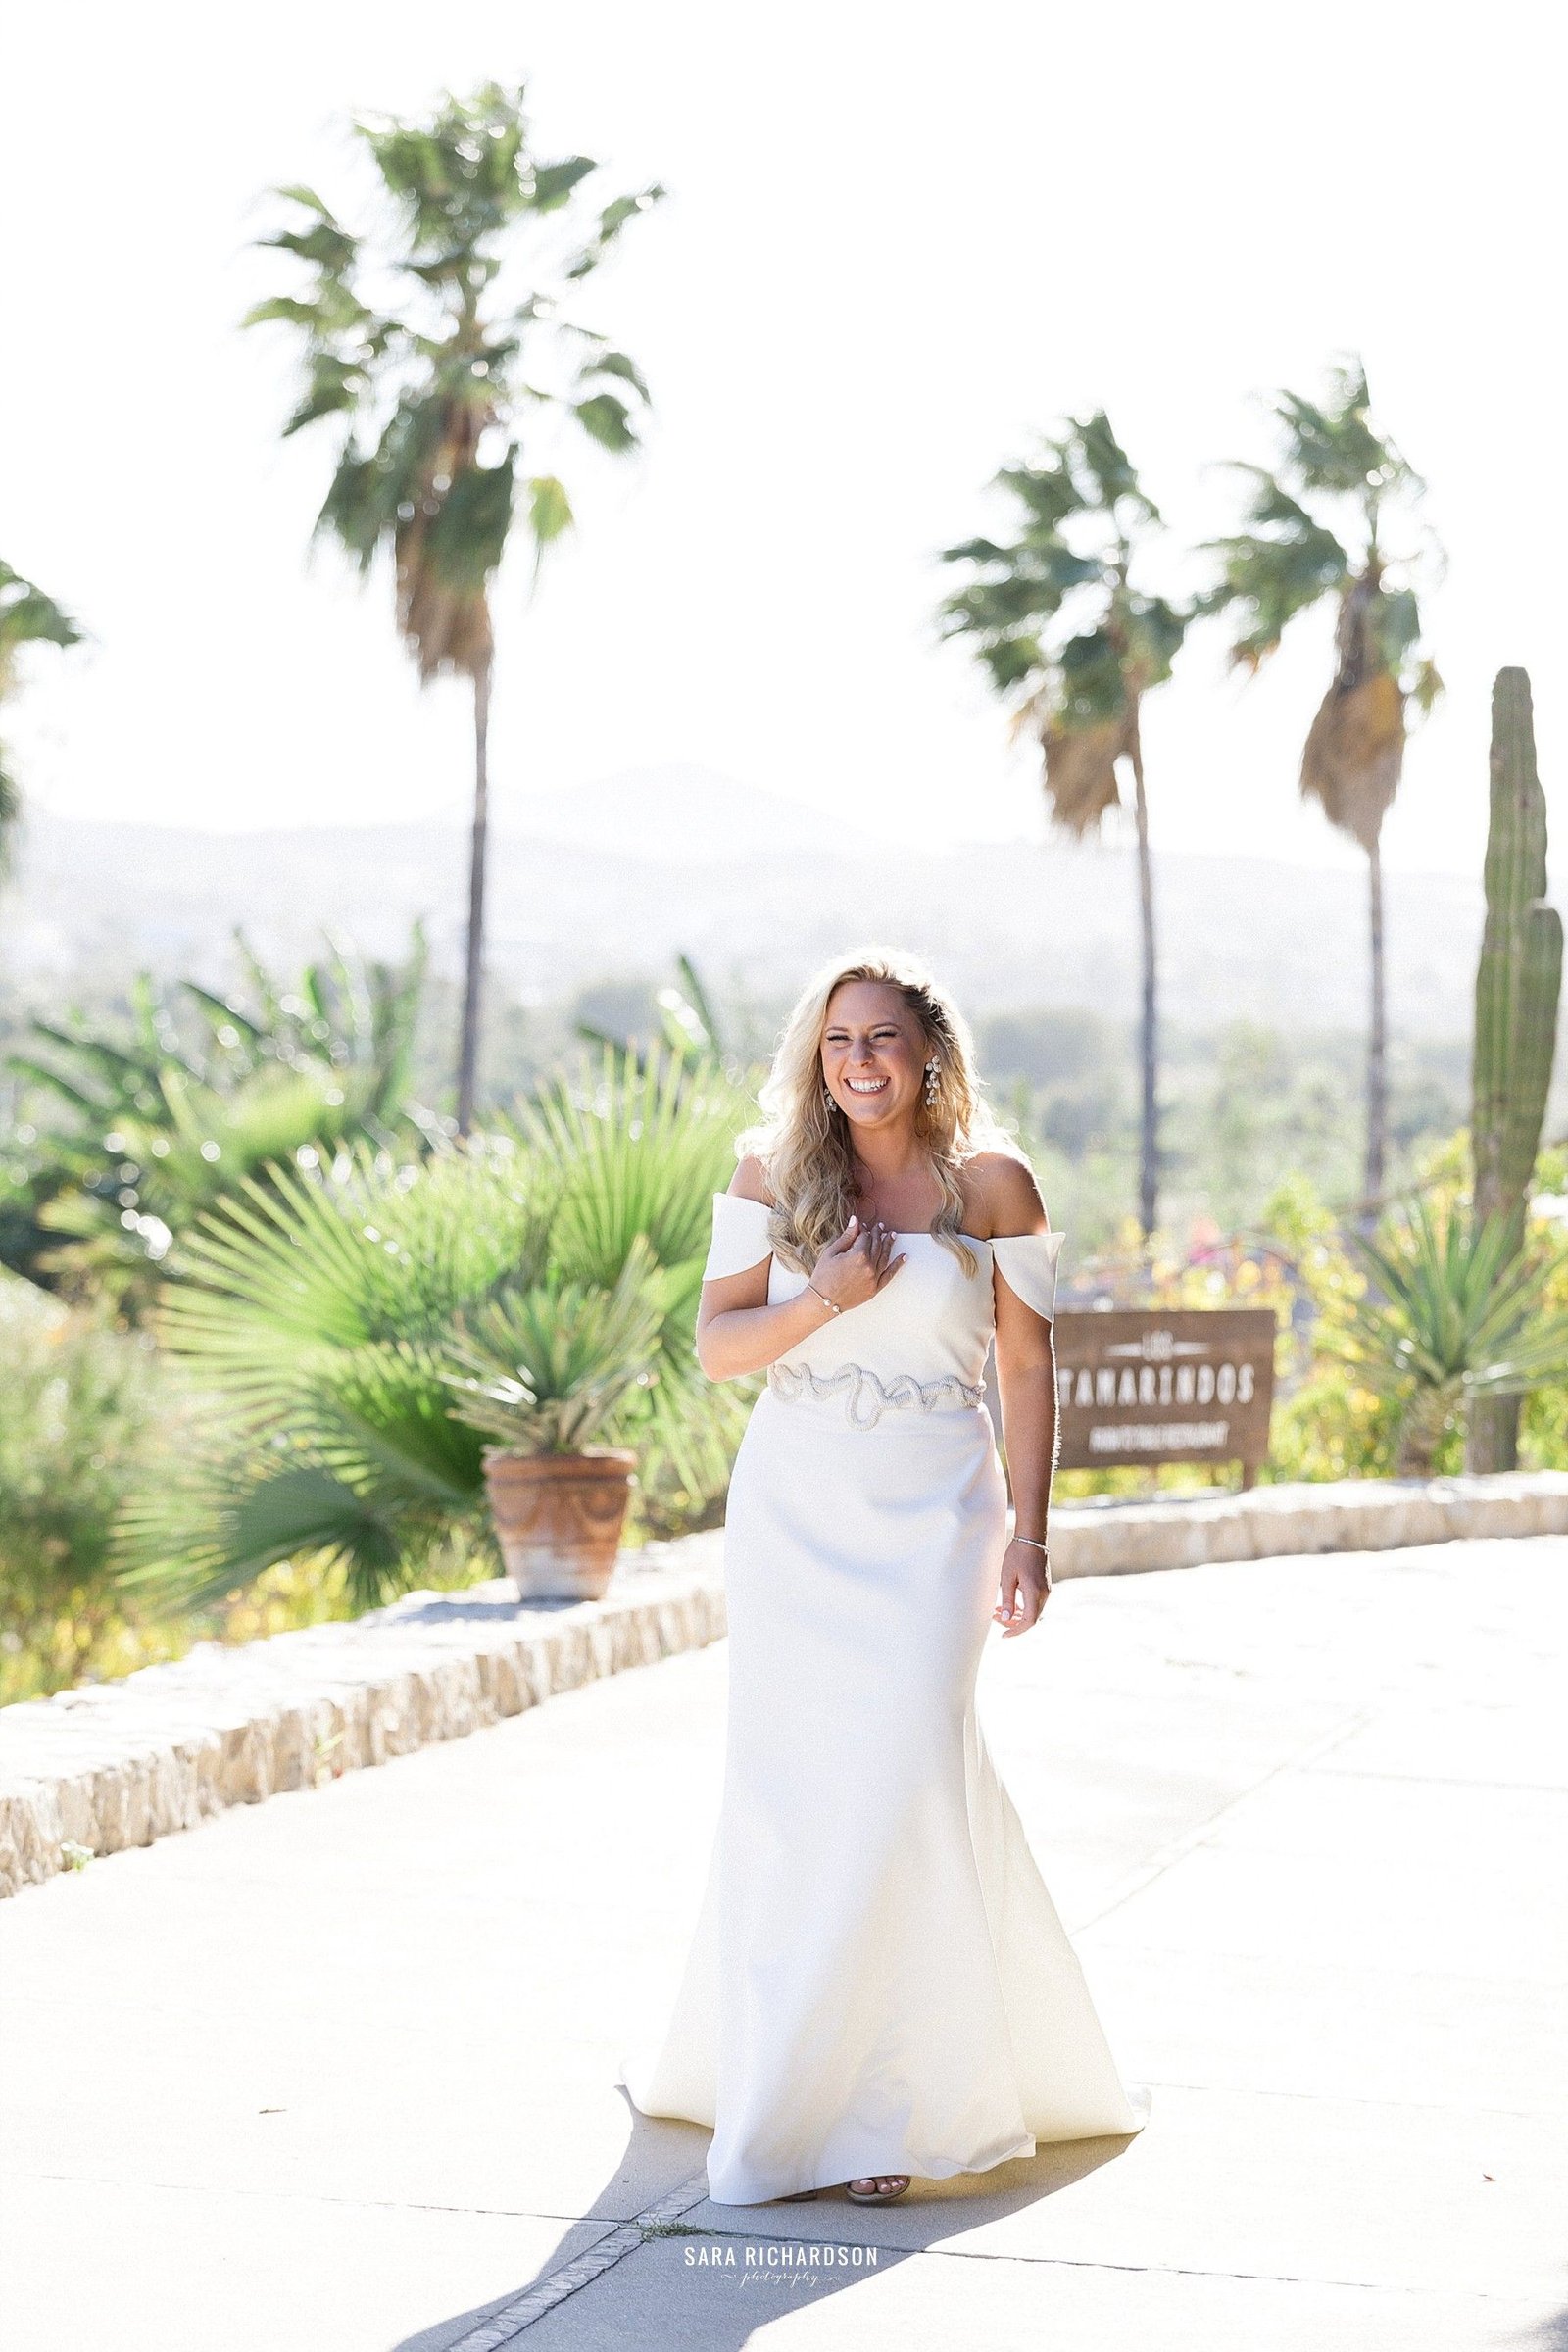 Bride very happy right after the ceremony. Beautiful scenery only in Los Cabos Mexico.